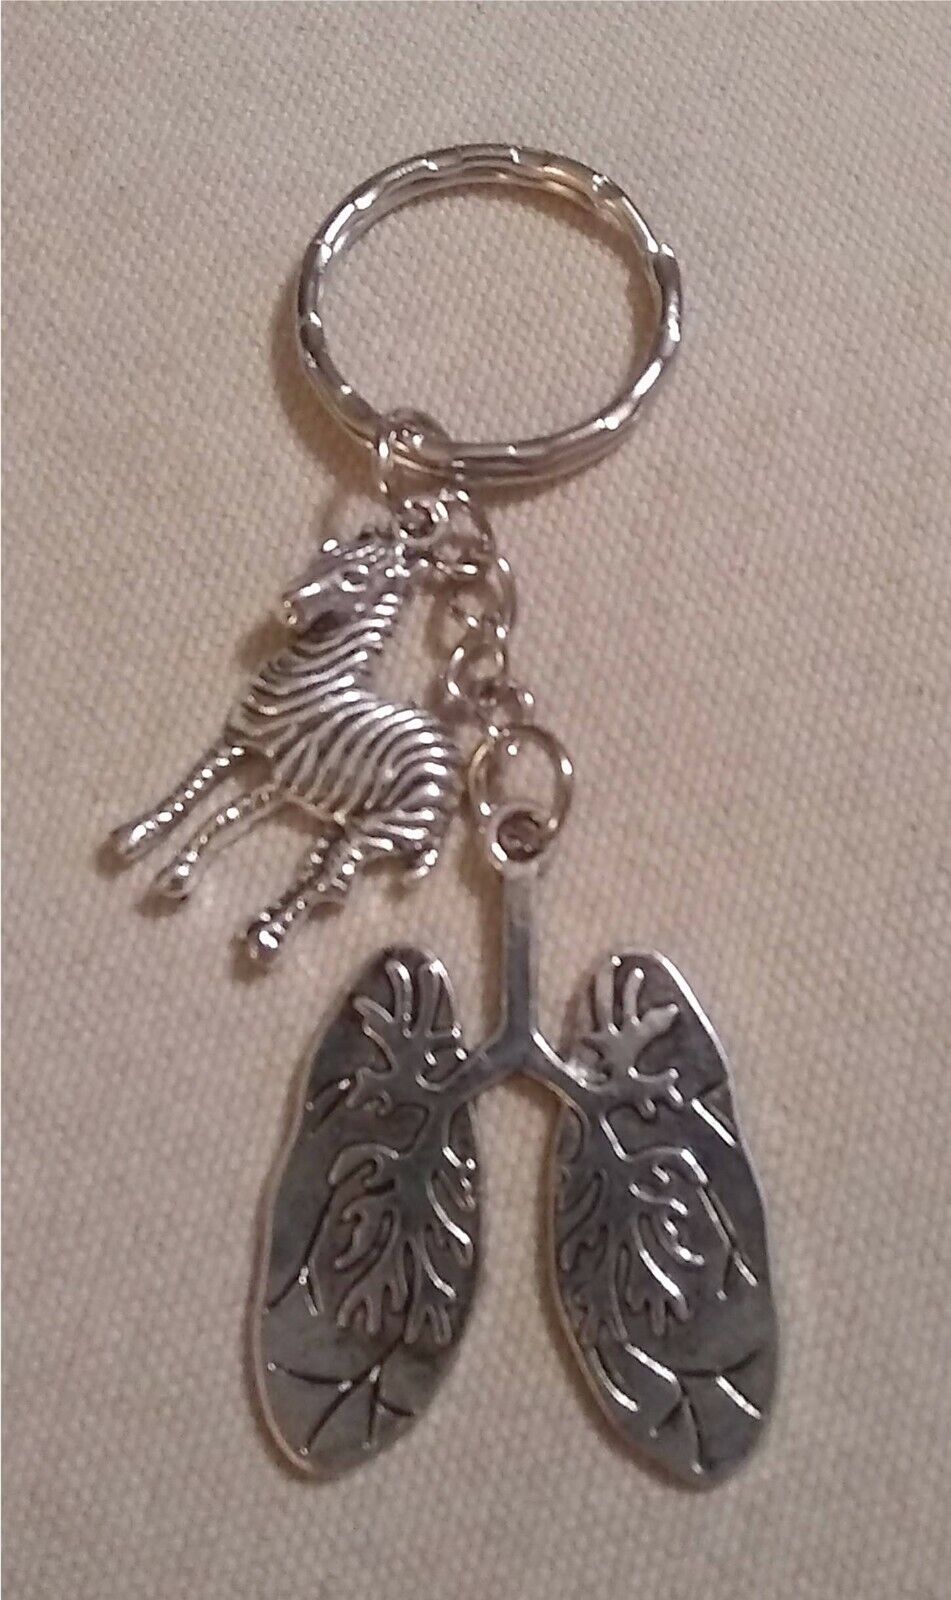 Lungs Keyring with the Zebra Charm